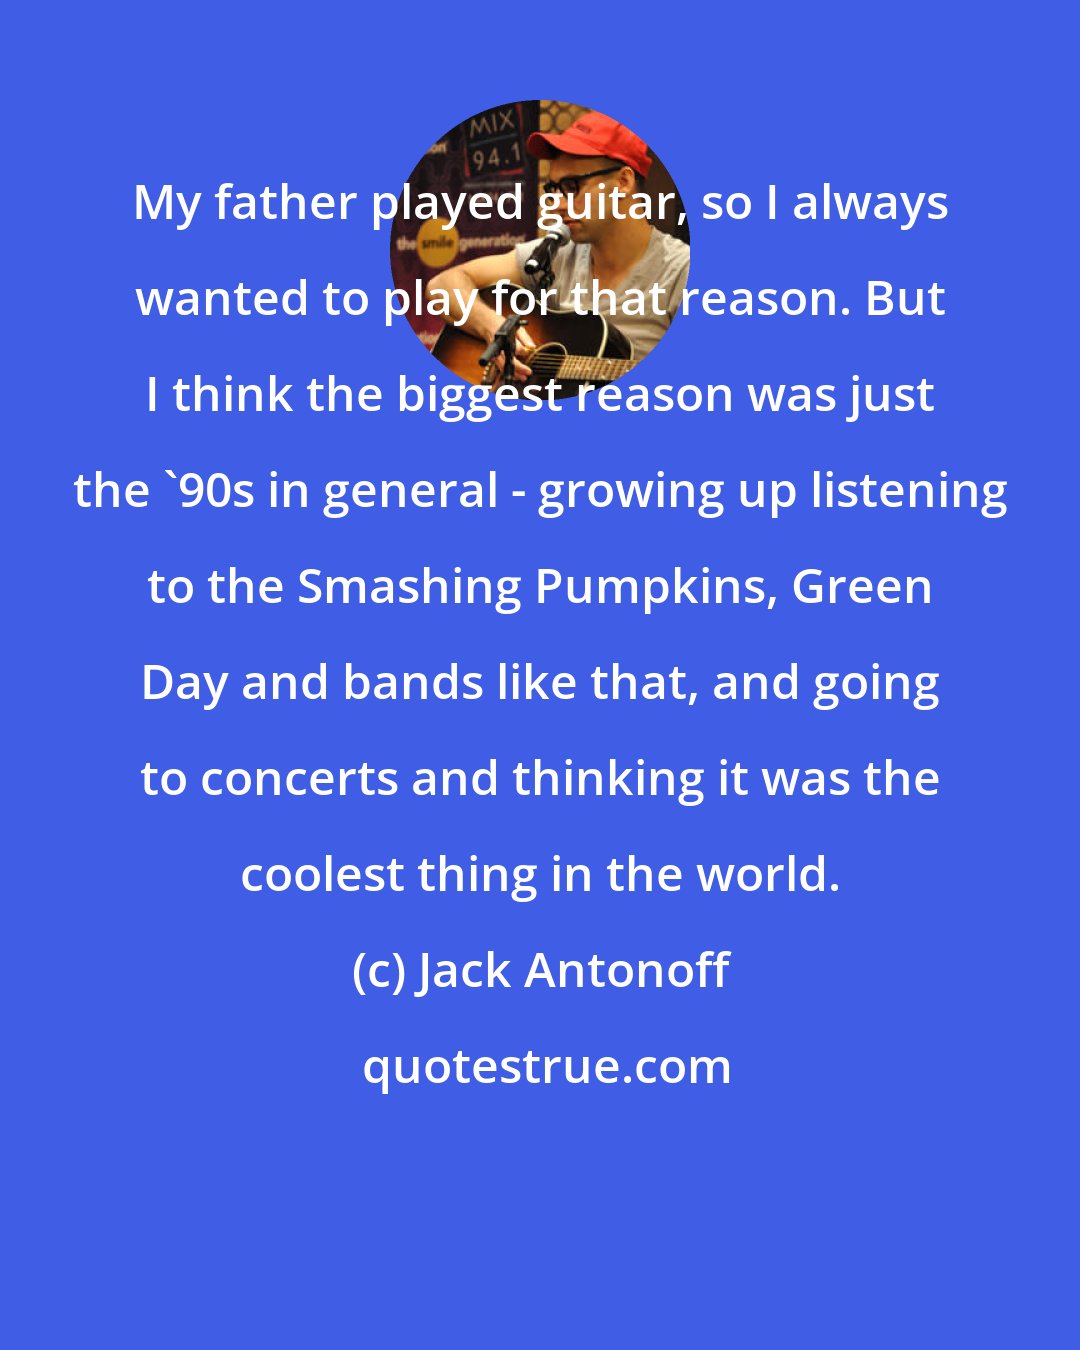 Jack Antonoff: My father played guitar, so I always wanted to play for that reason. But I think the biggest reason was just the '90s in general - growing up listening to the Smashing Pumpkins, Green Day and bands like that, and going to concerts and thinking it was the coolest thing in the world.